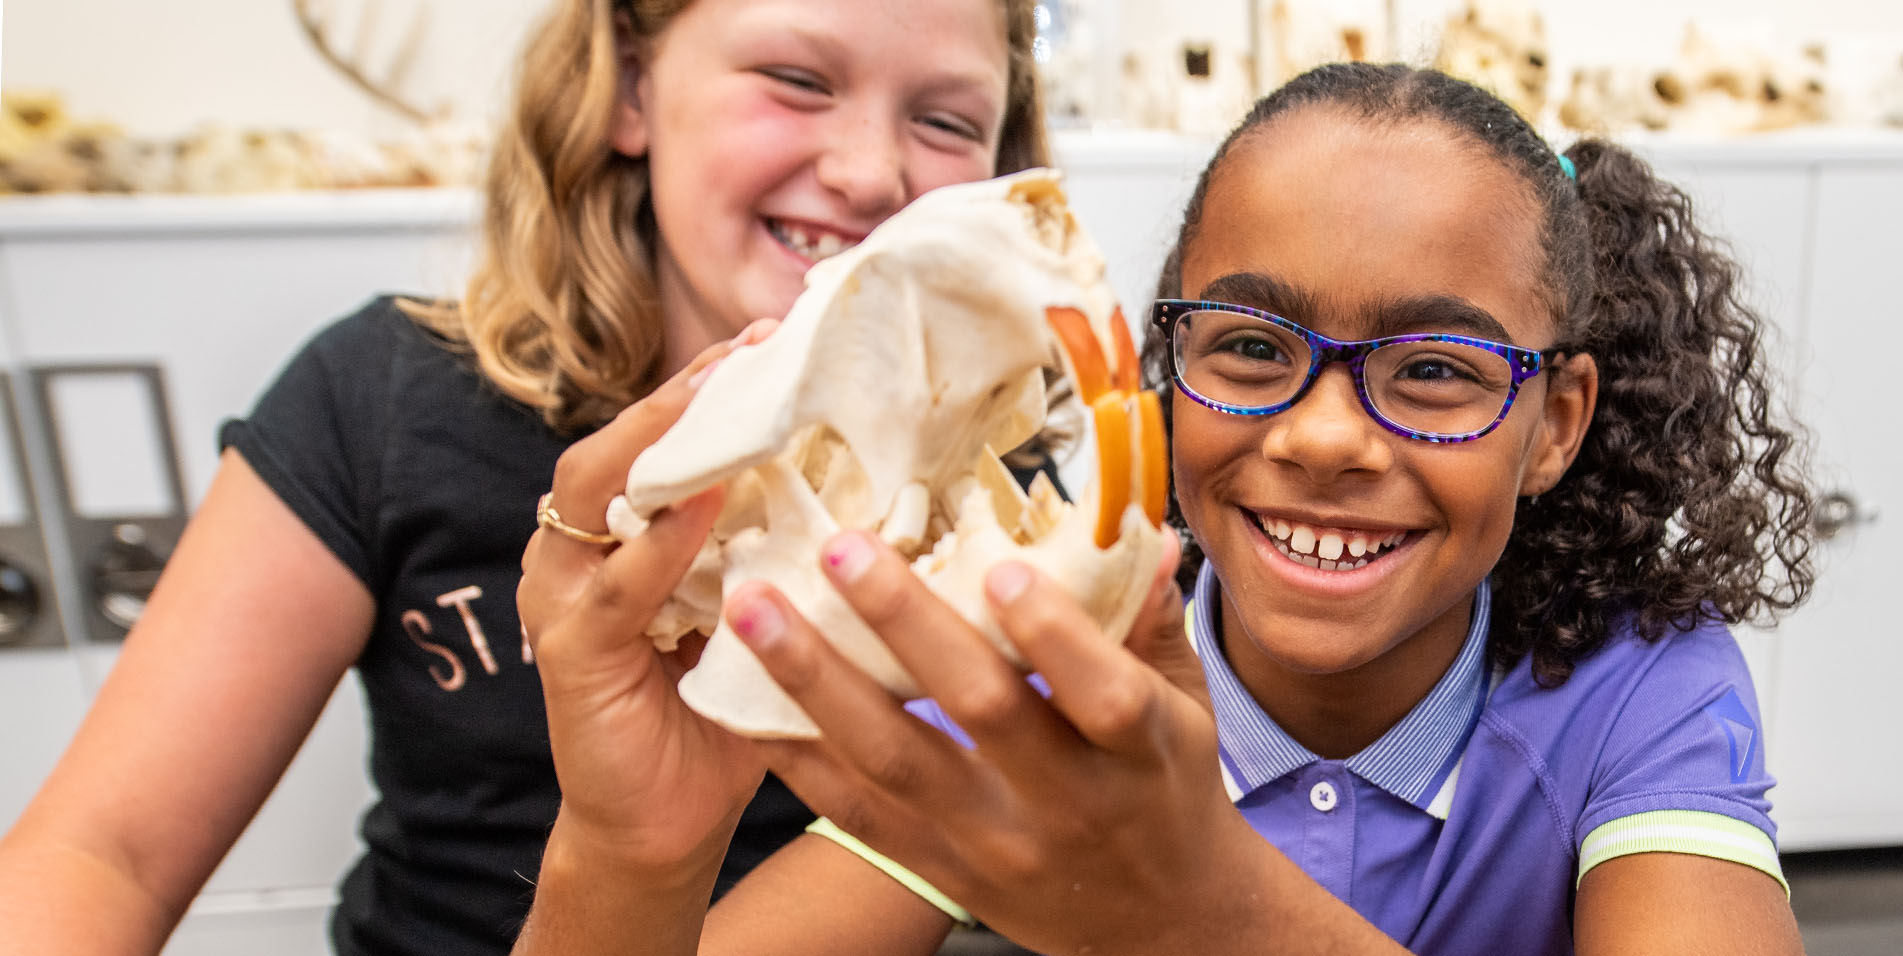 Two smiling girls examine an animal skull that one girl is holding